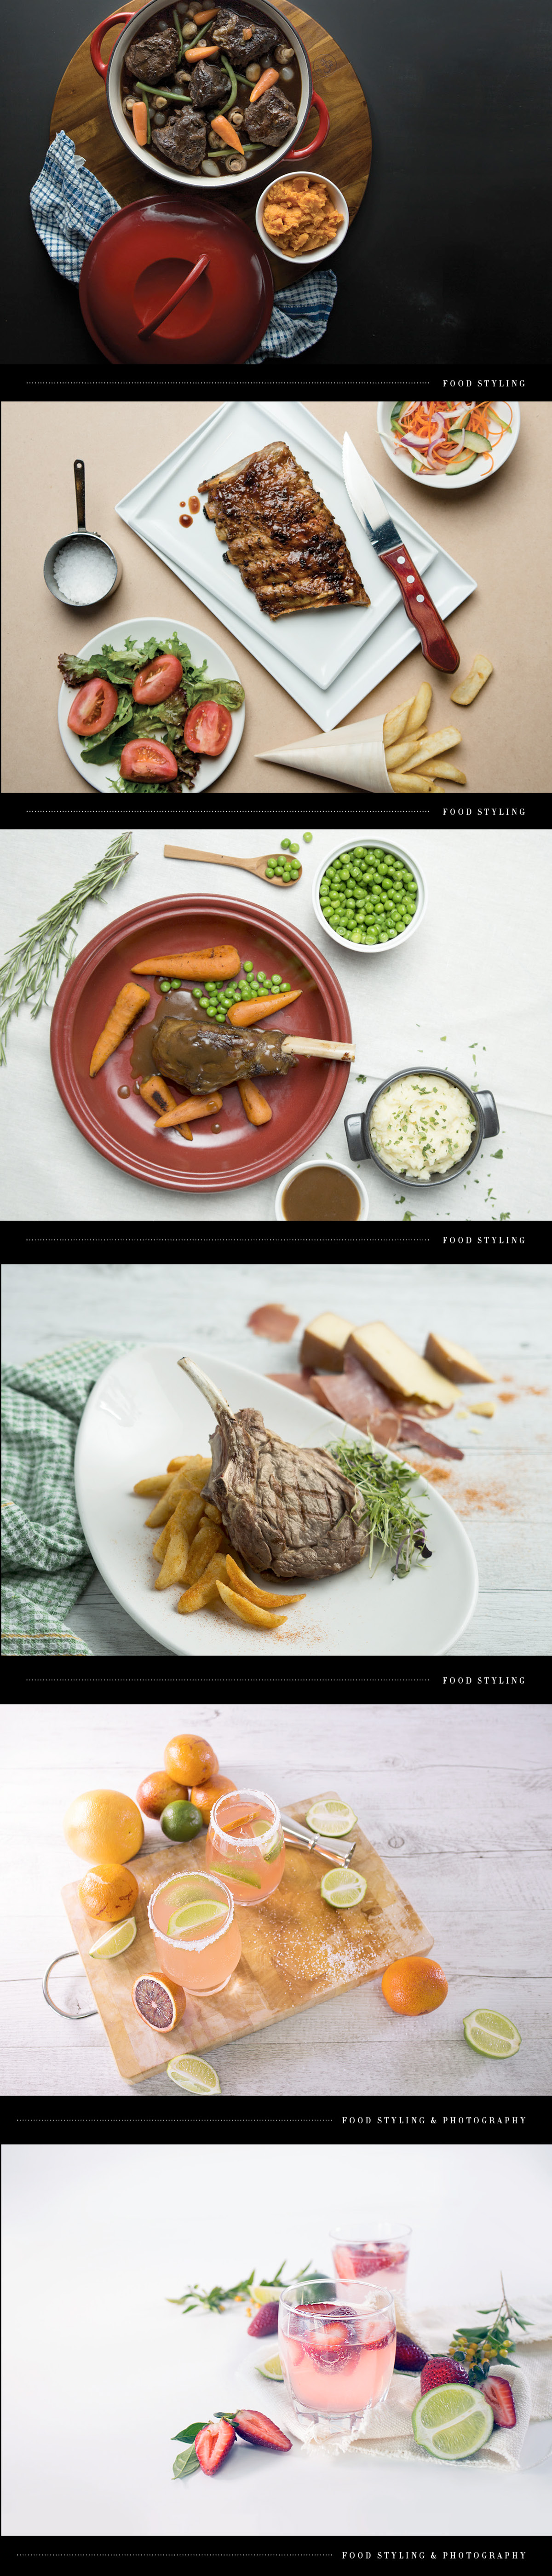 Food  drink refresh delicious photo Style food styling food photography lighting composition food art art dishes seasonal